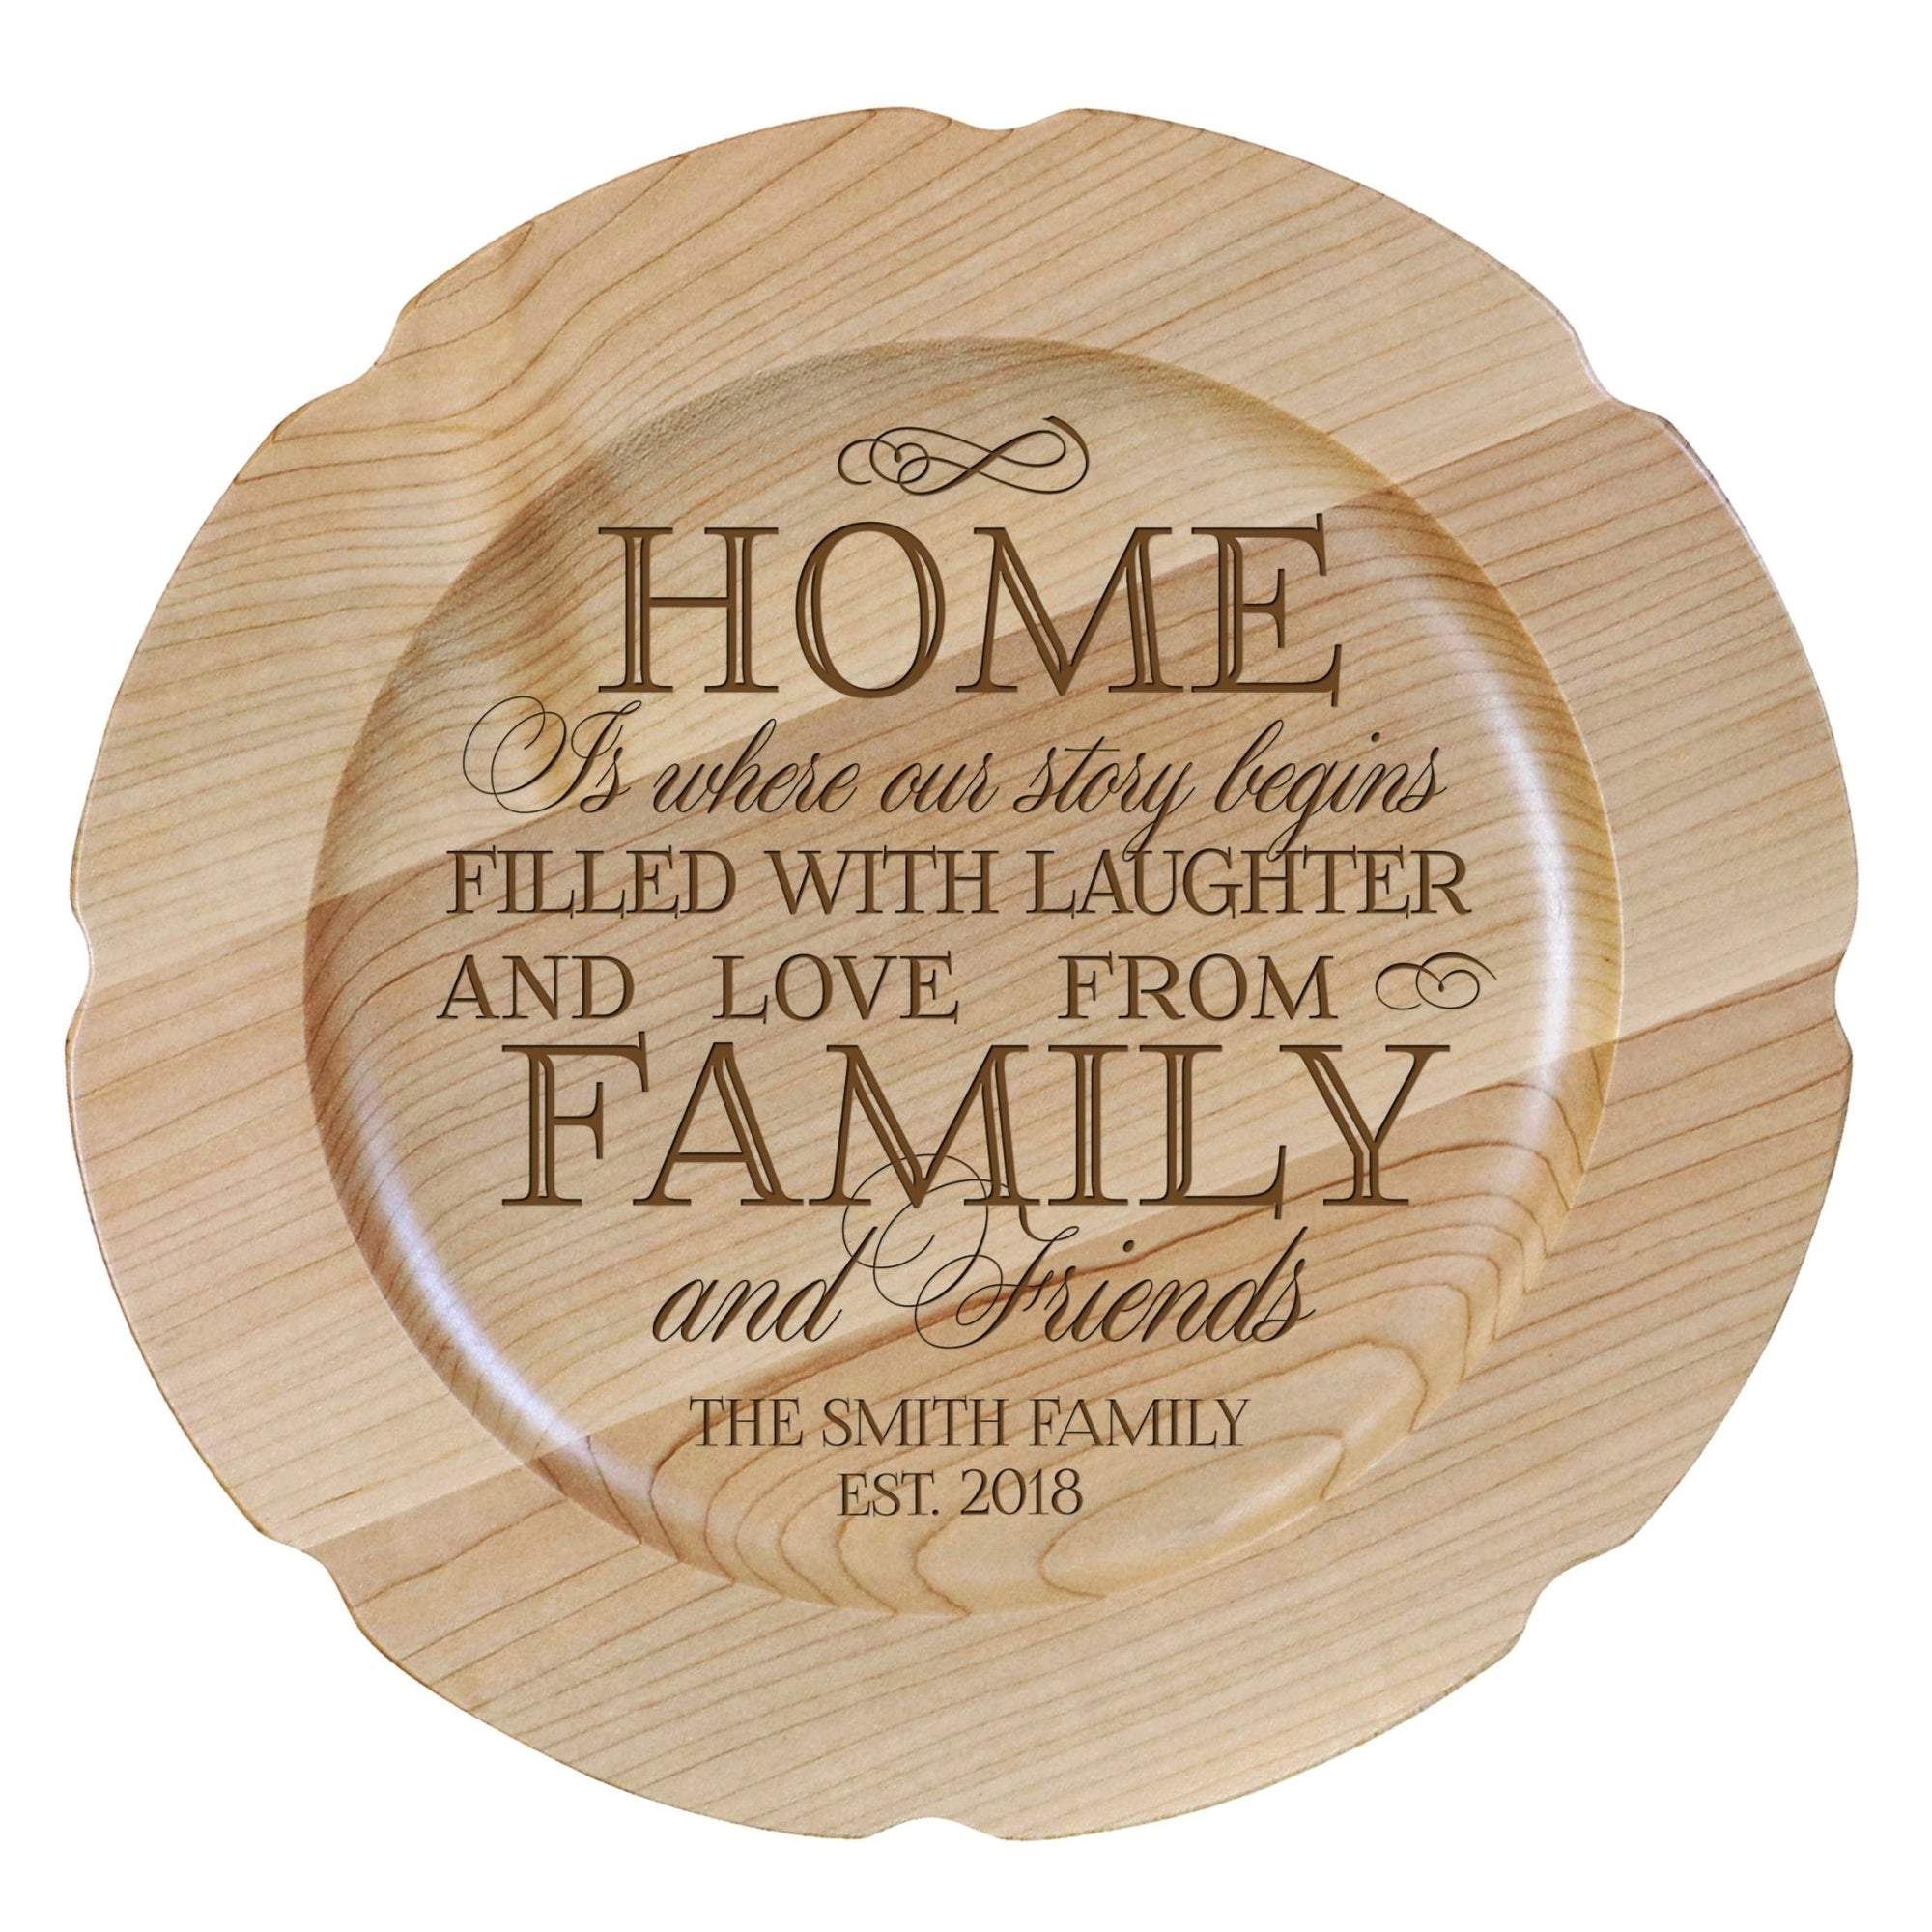 Personalized Inspirational Plates With Quotes - Family and Friends - LifeSong Milestones